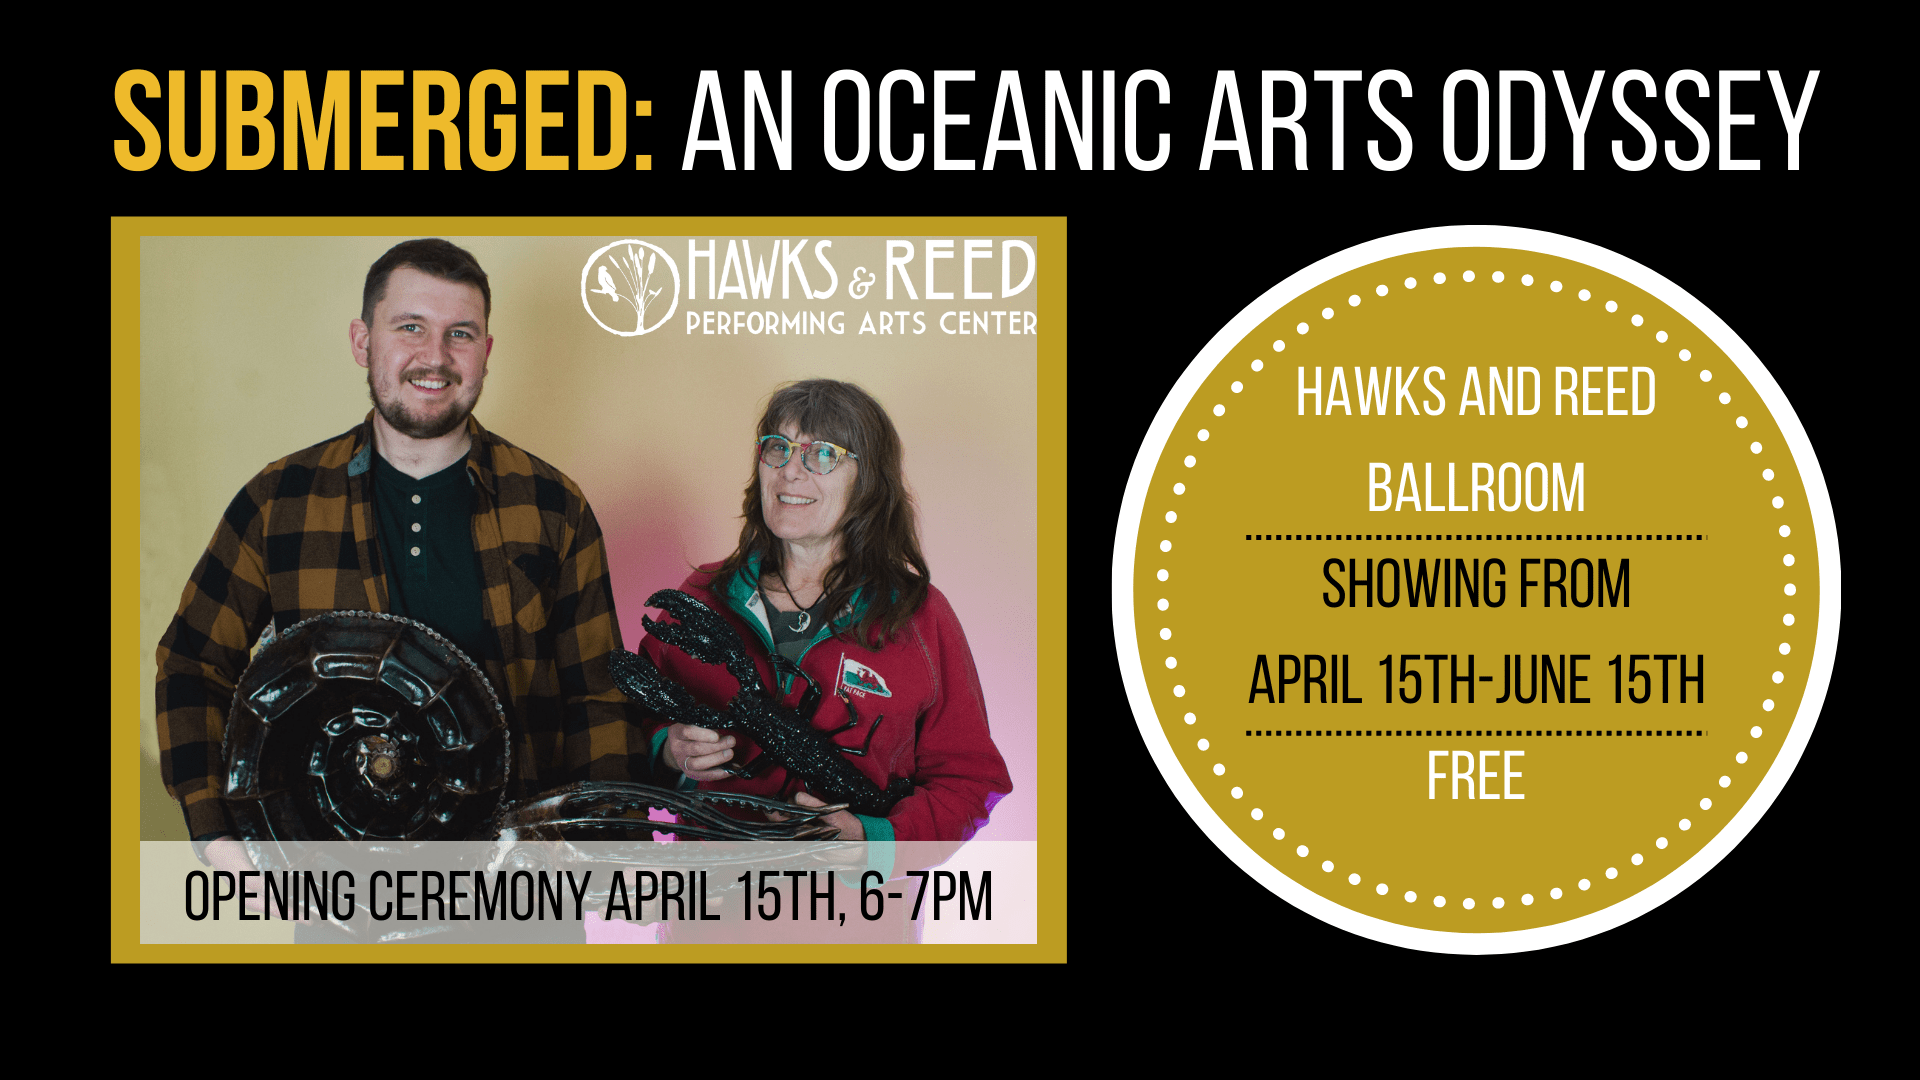 Submerged: An Oceanic Arts Odyssey” opens April 15 at Hawks and Reed!